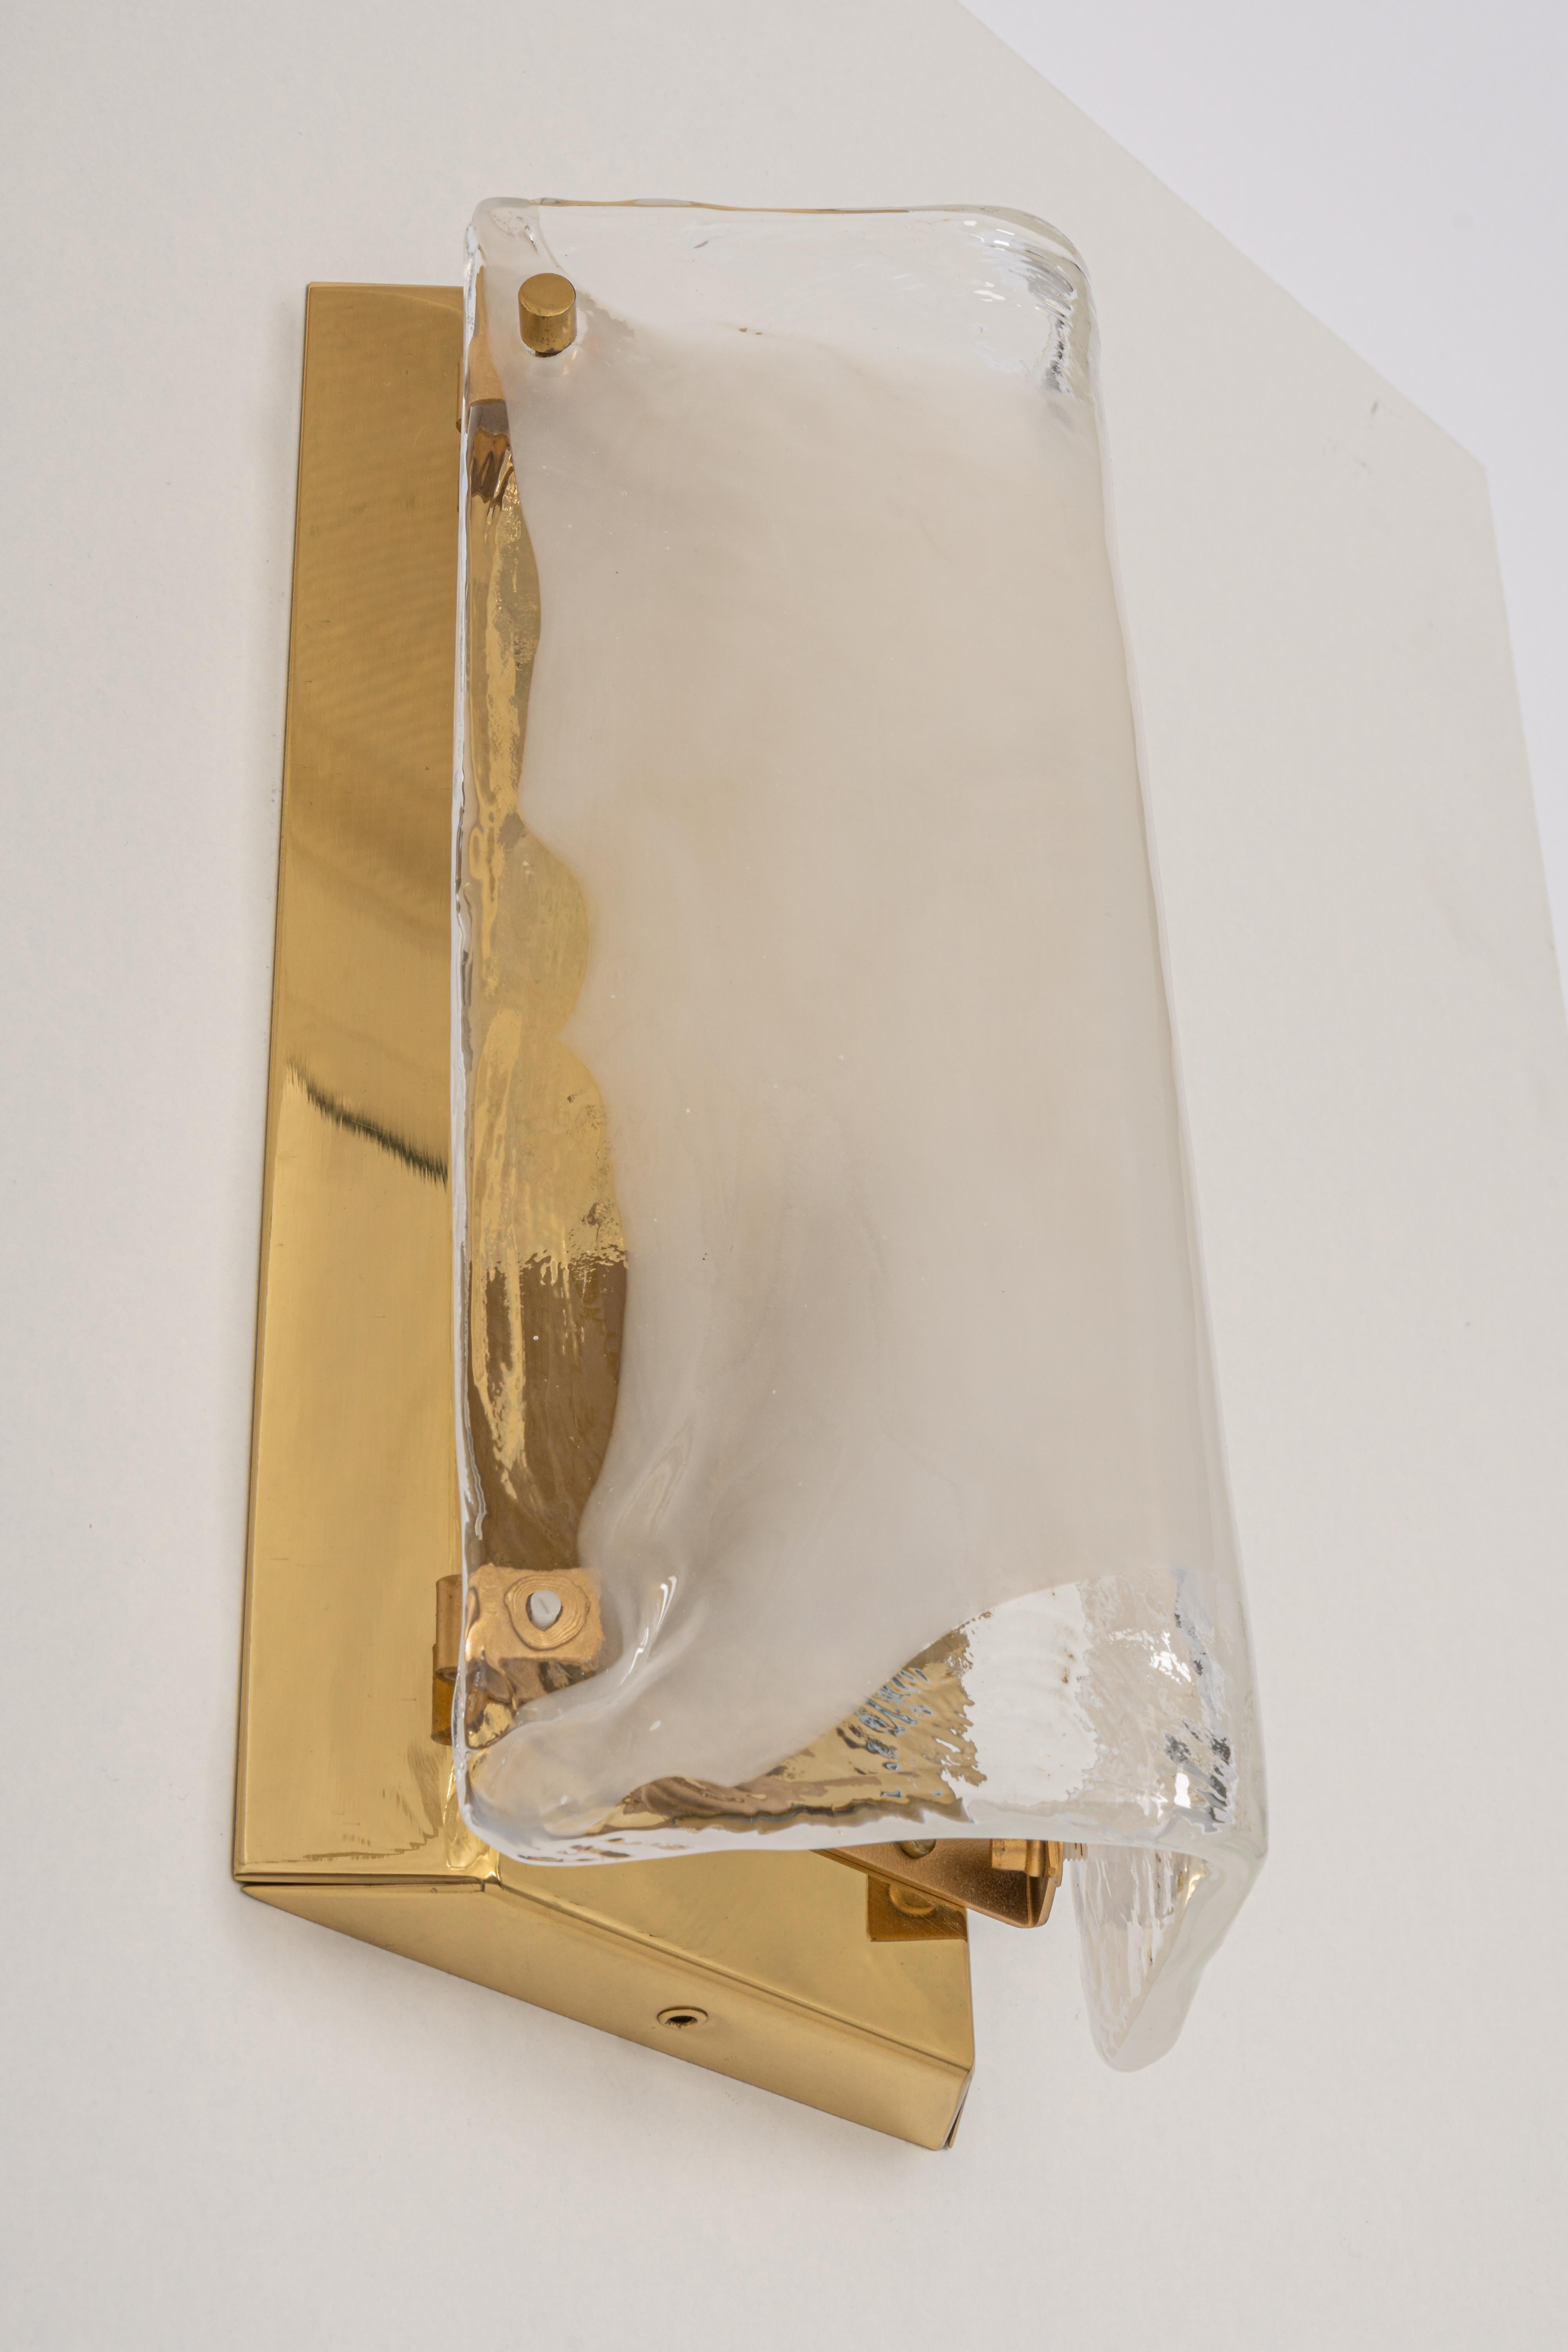 Wonderful mid-century wall sconce with Murano glass, made by Kalmar, Austria, manufactured, circa 1960-1969.
The frame is gilt brass.
High quality and in very good condition. Cleaned, well-wired, and ready to use.  

Each sconce requires 1 x E14